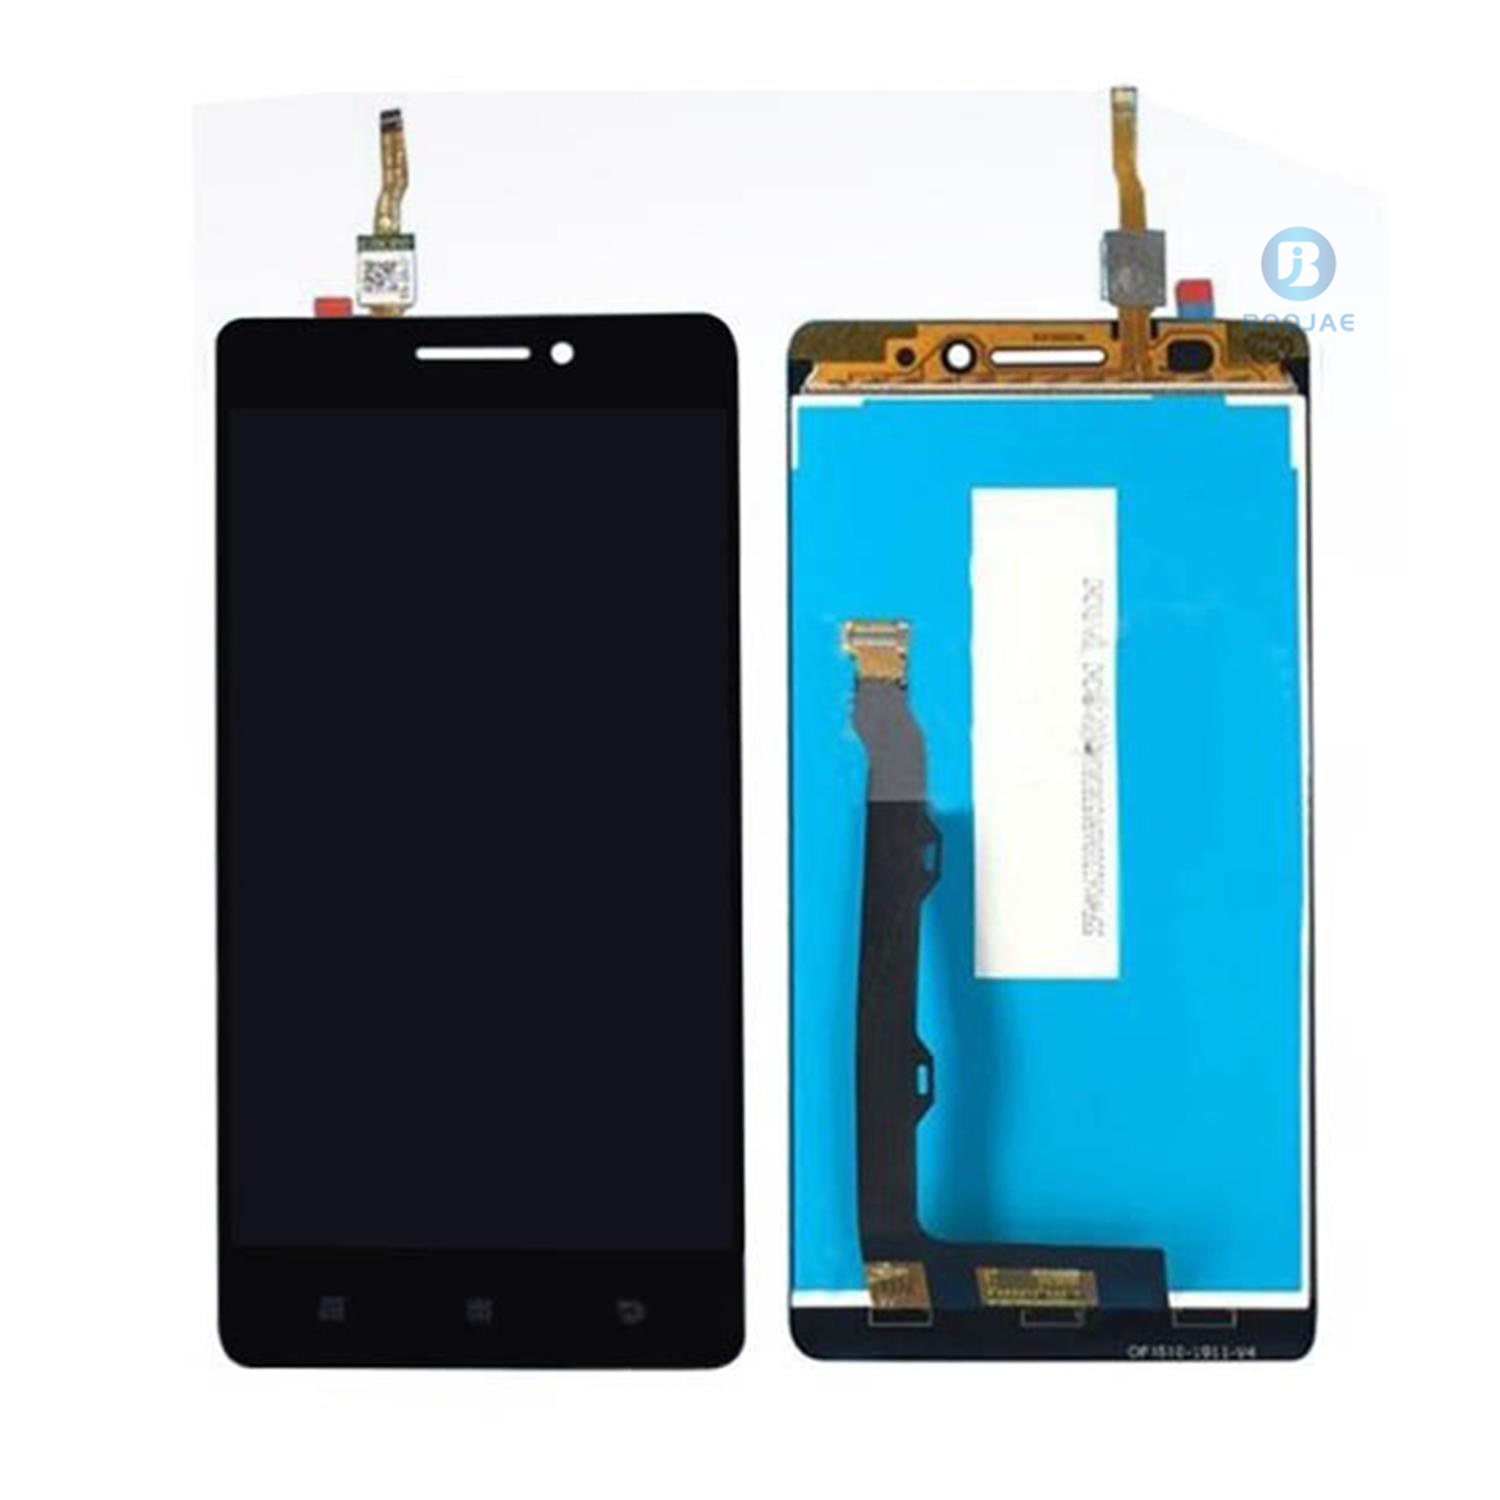 For Lenovo K3 LCD Screen Display and Touch Panel Digitizer Assembly Replacement